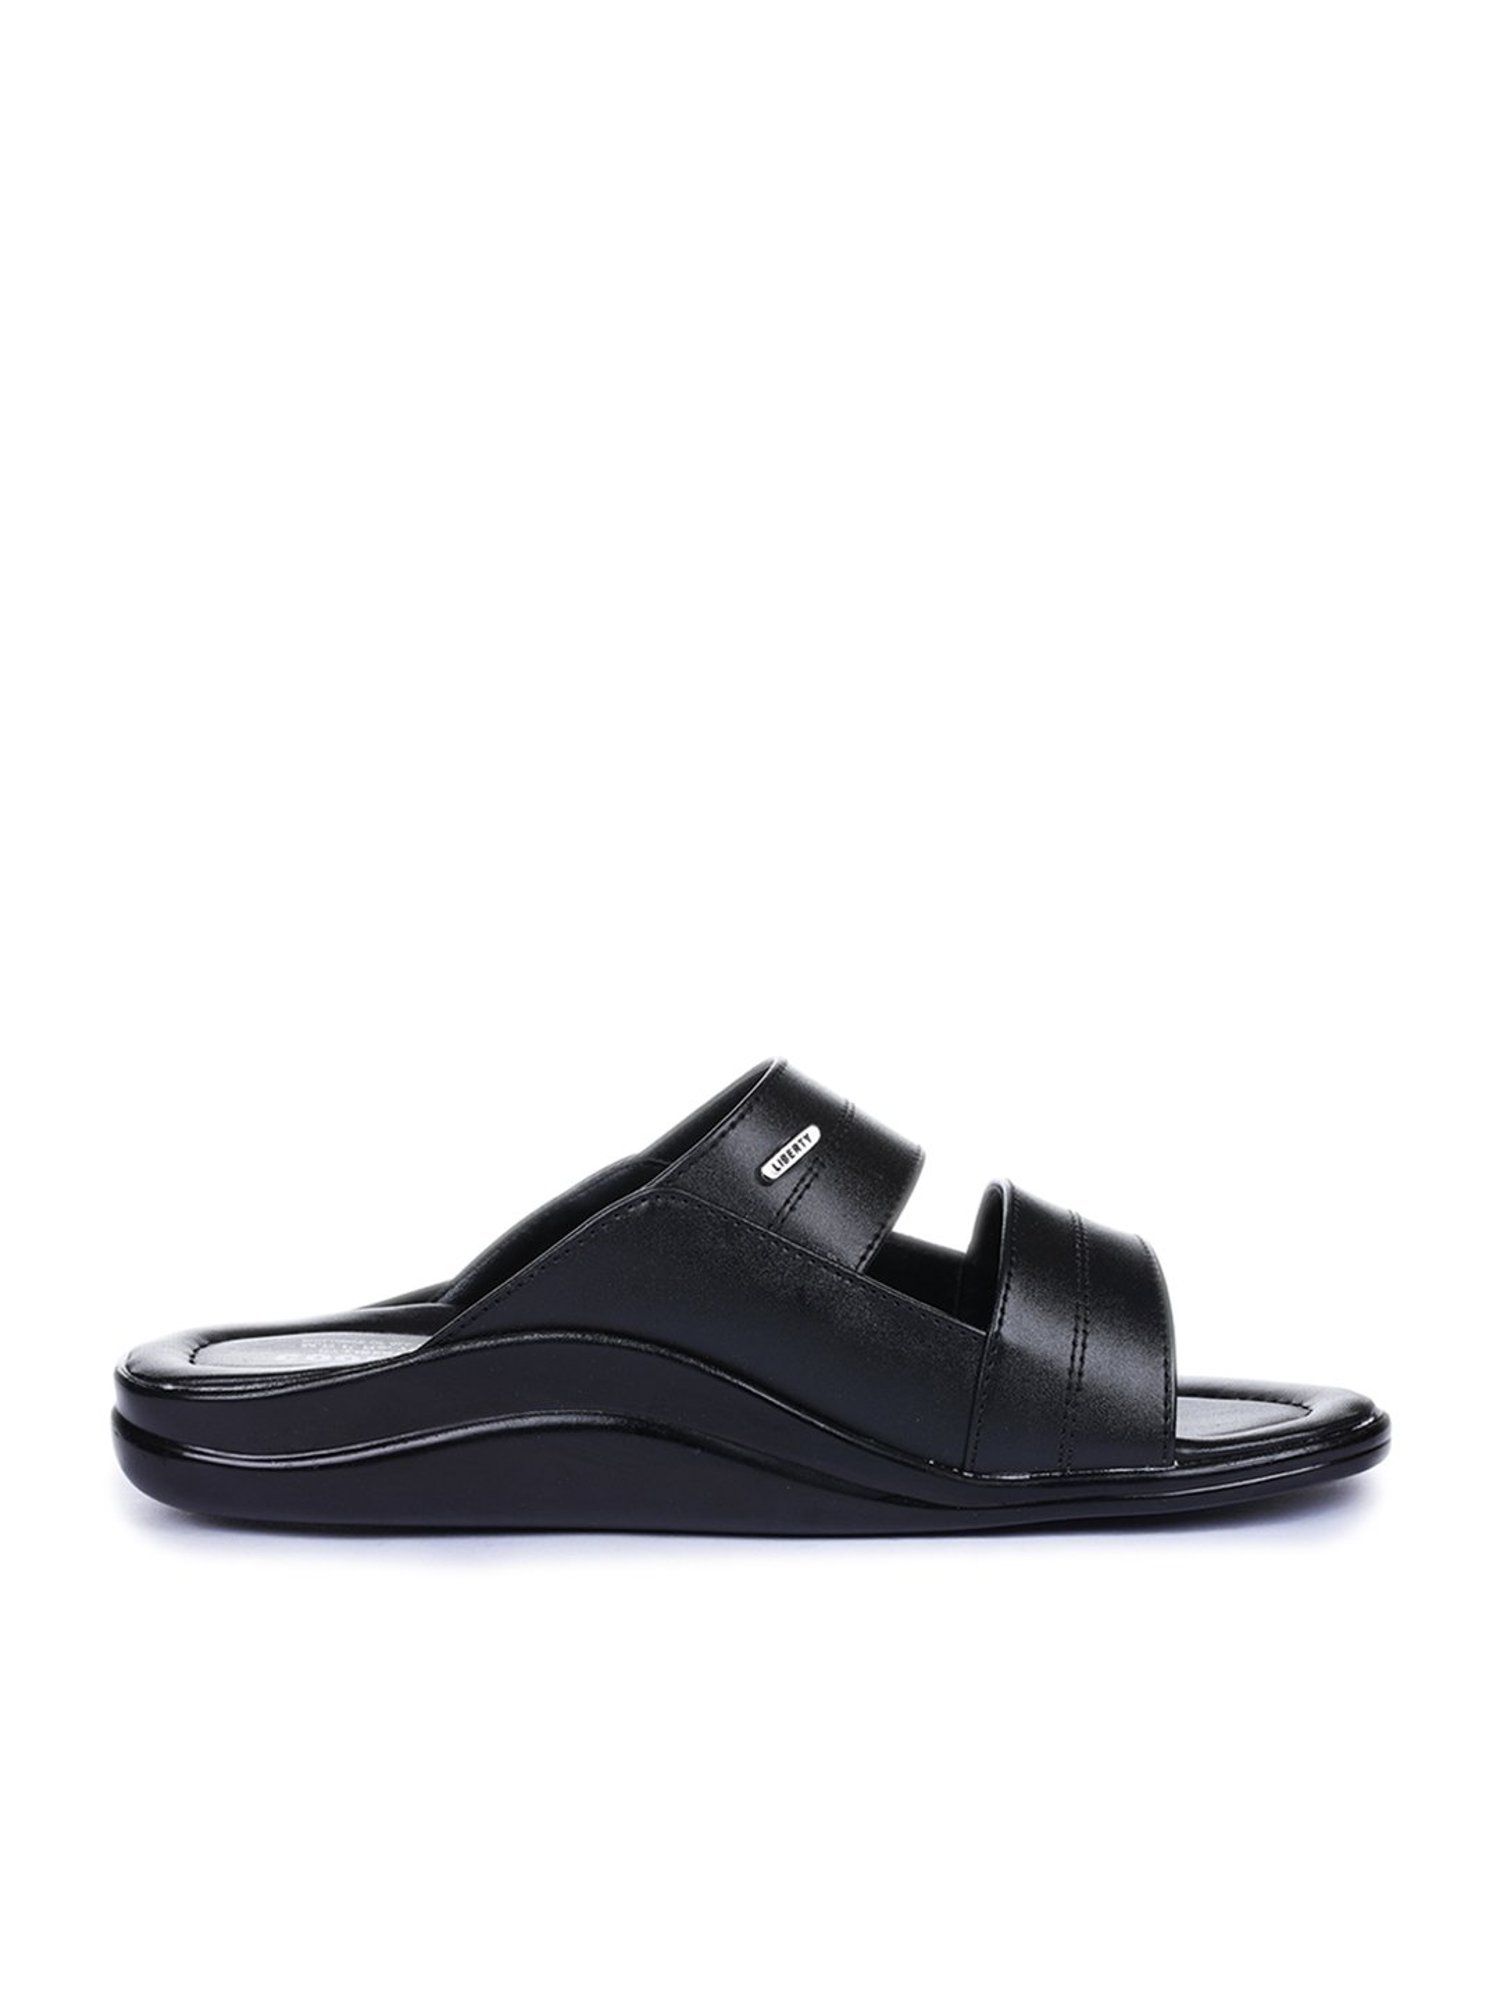 Coolers Formal (Black) Sandals For Mens 7123-84 By Liberty